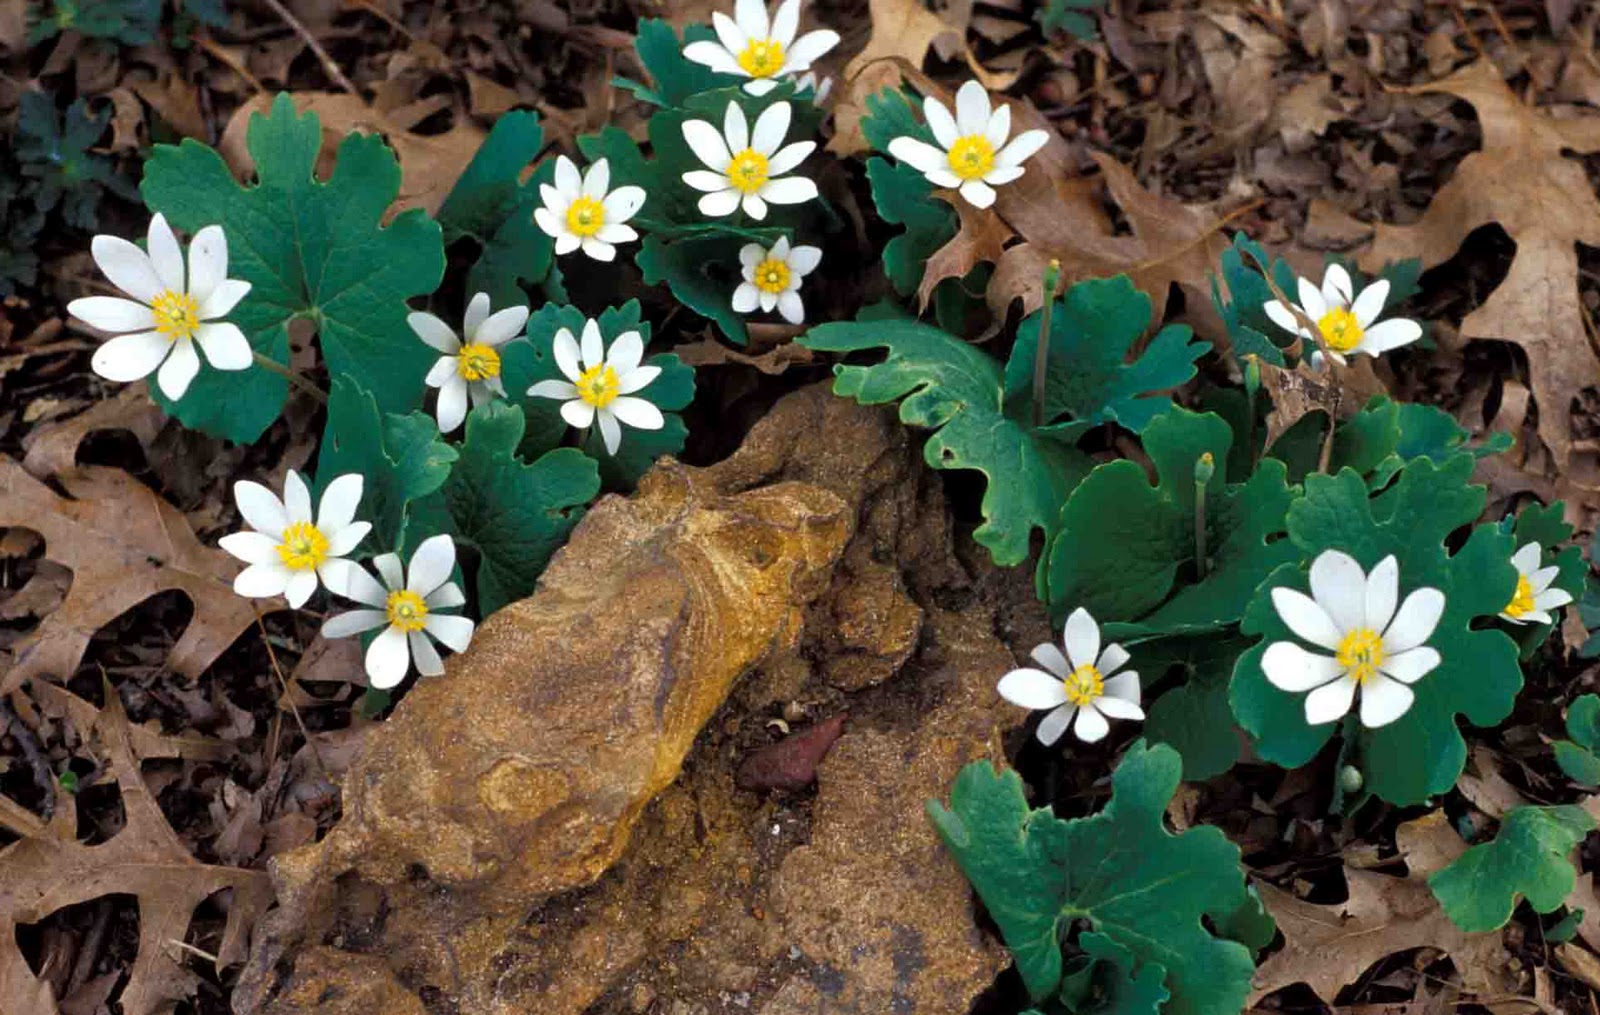 bloodroot native plant canadensis kentucky wildflowers spring sanguinaria ky flowers woodland week benefits health early wildlife